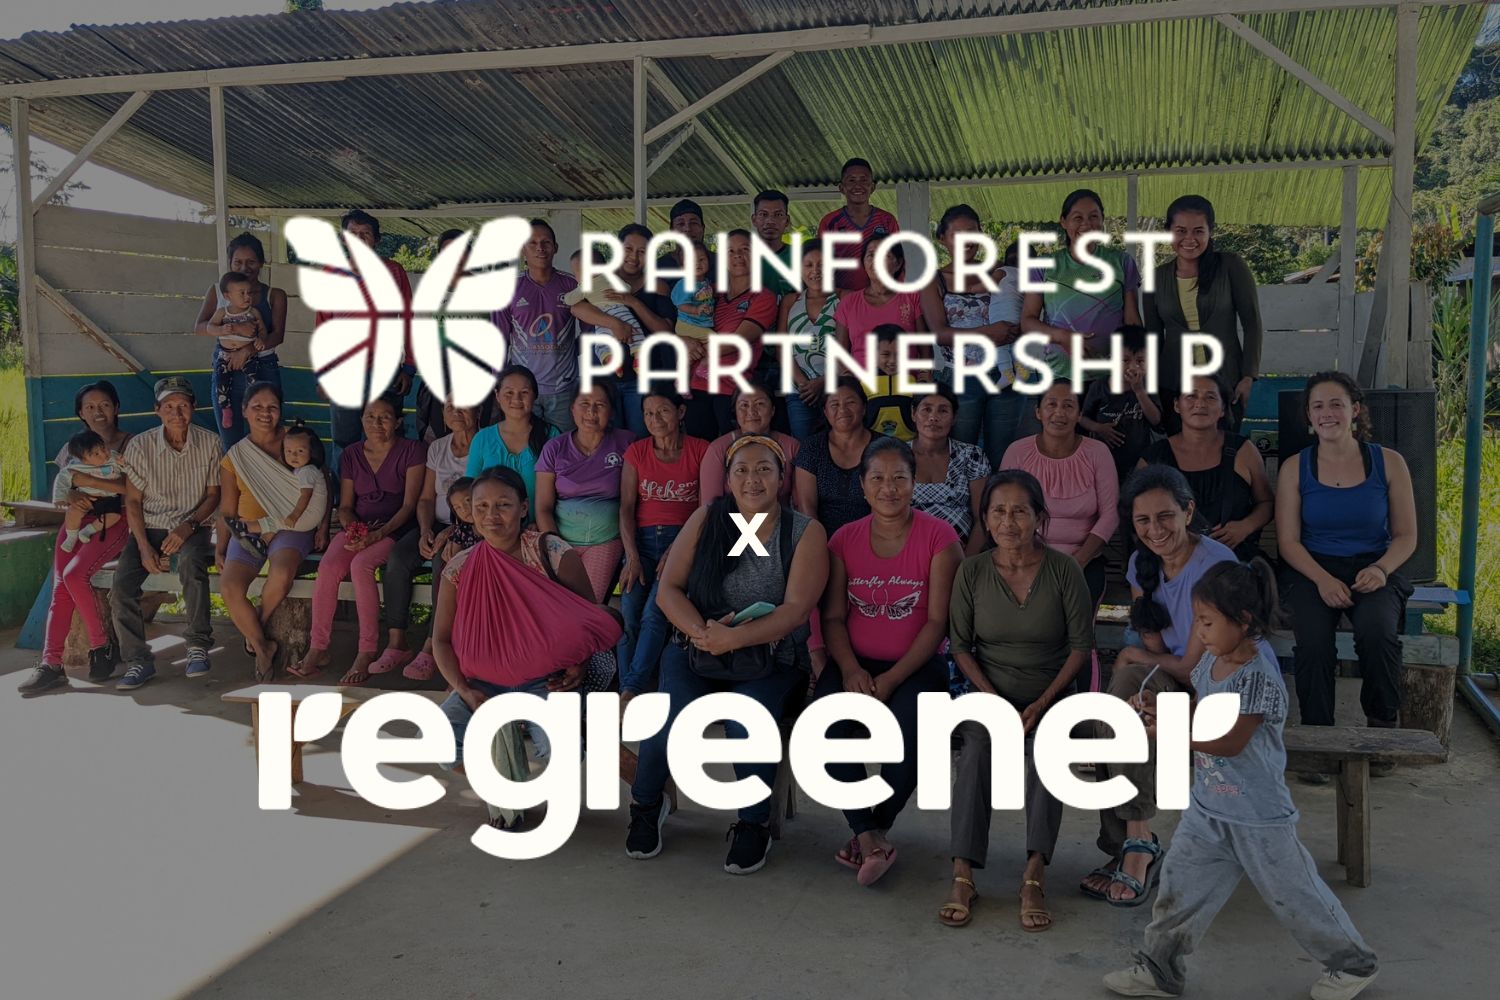 Community workers in Ecuador posing for a group picture with Rainforest Partnership & Regreener logo